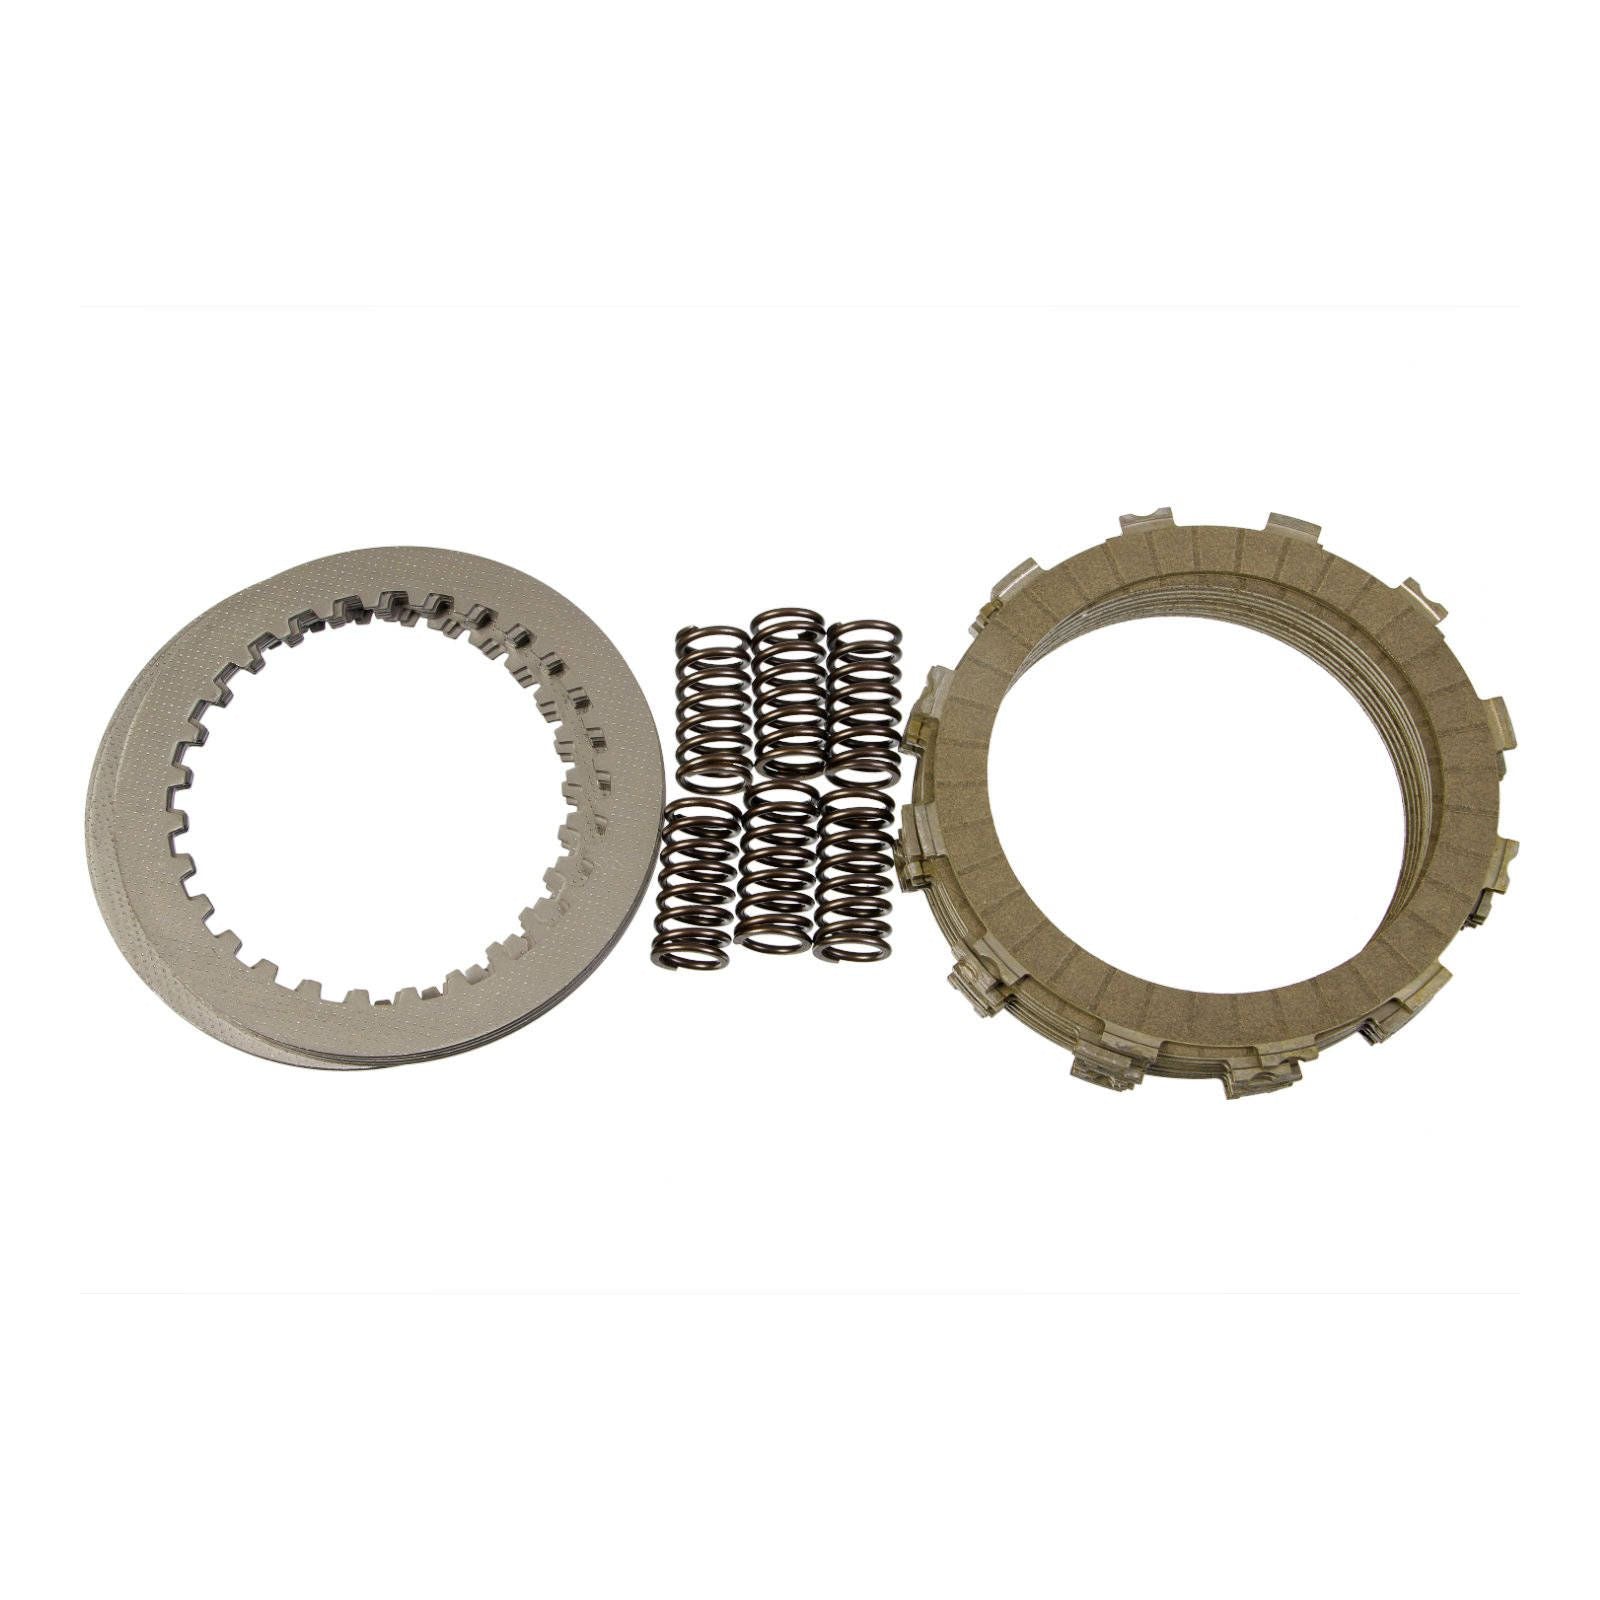 New WHITES Complete Clutch Kit For KTM SX-F 450/505 2007- #WCOK184